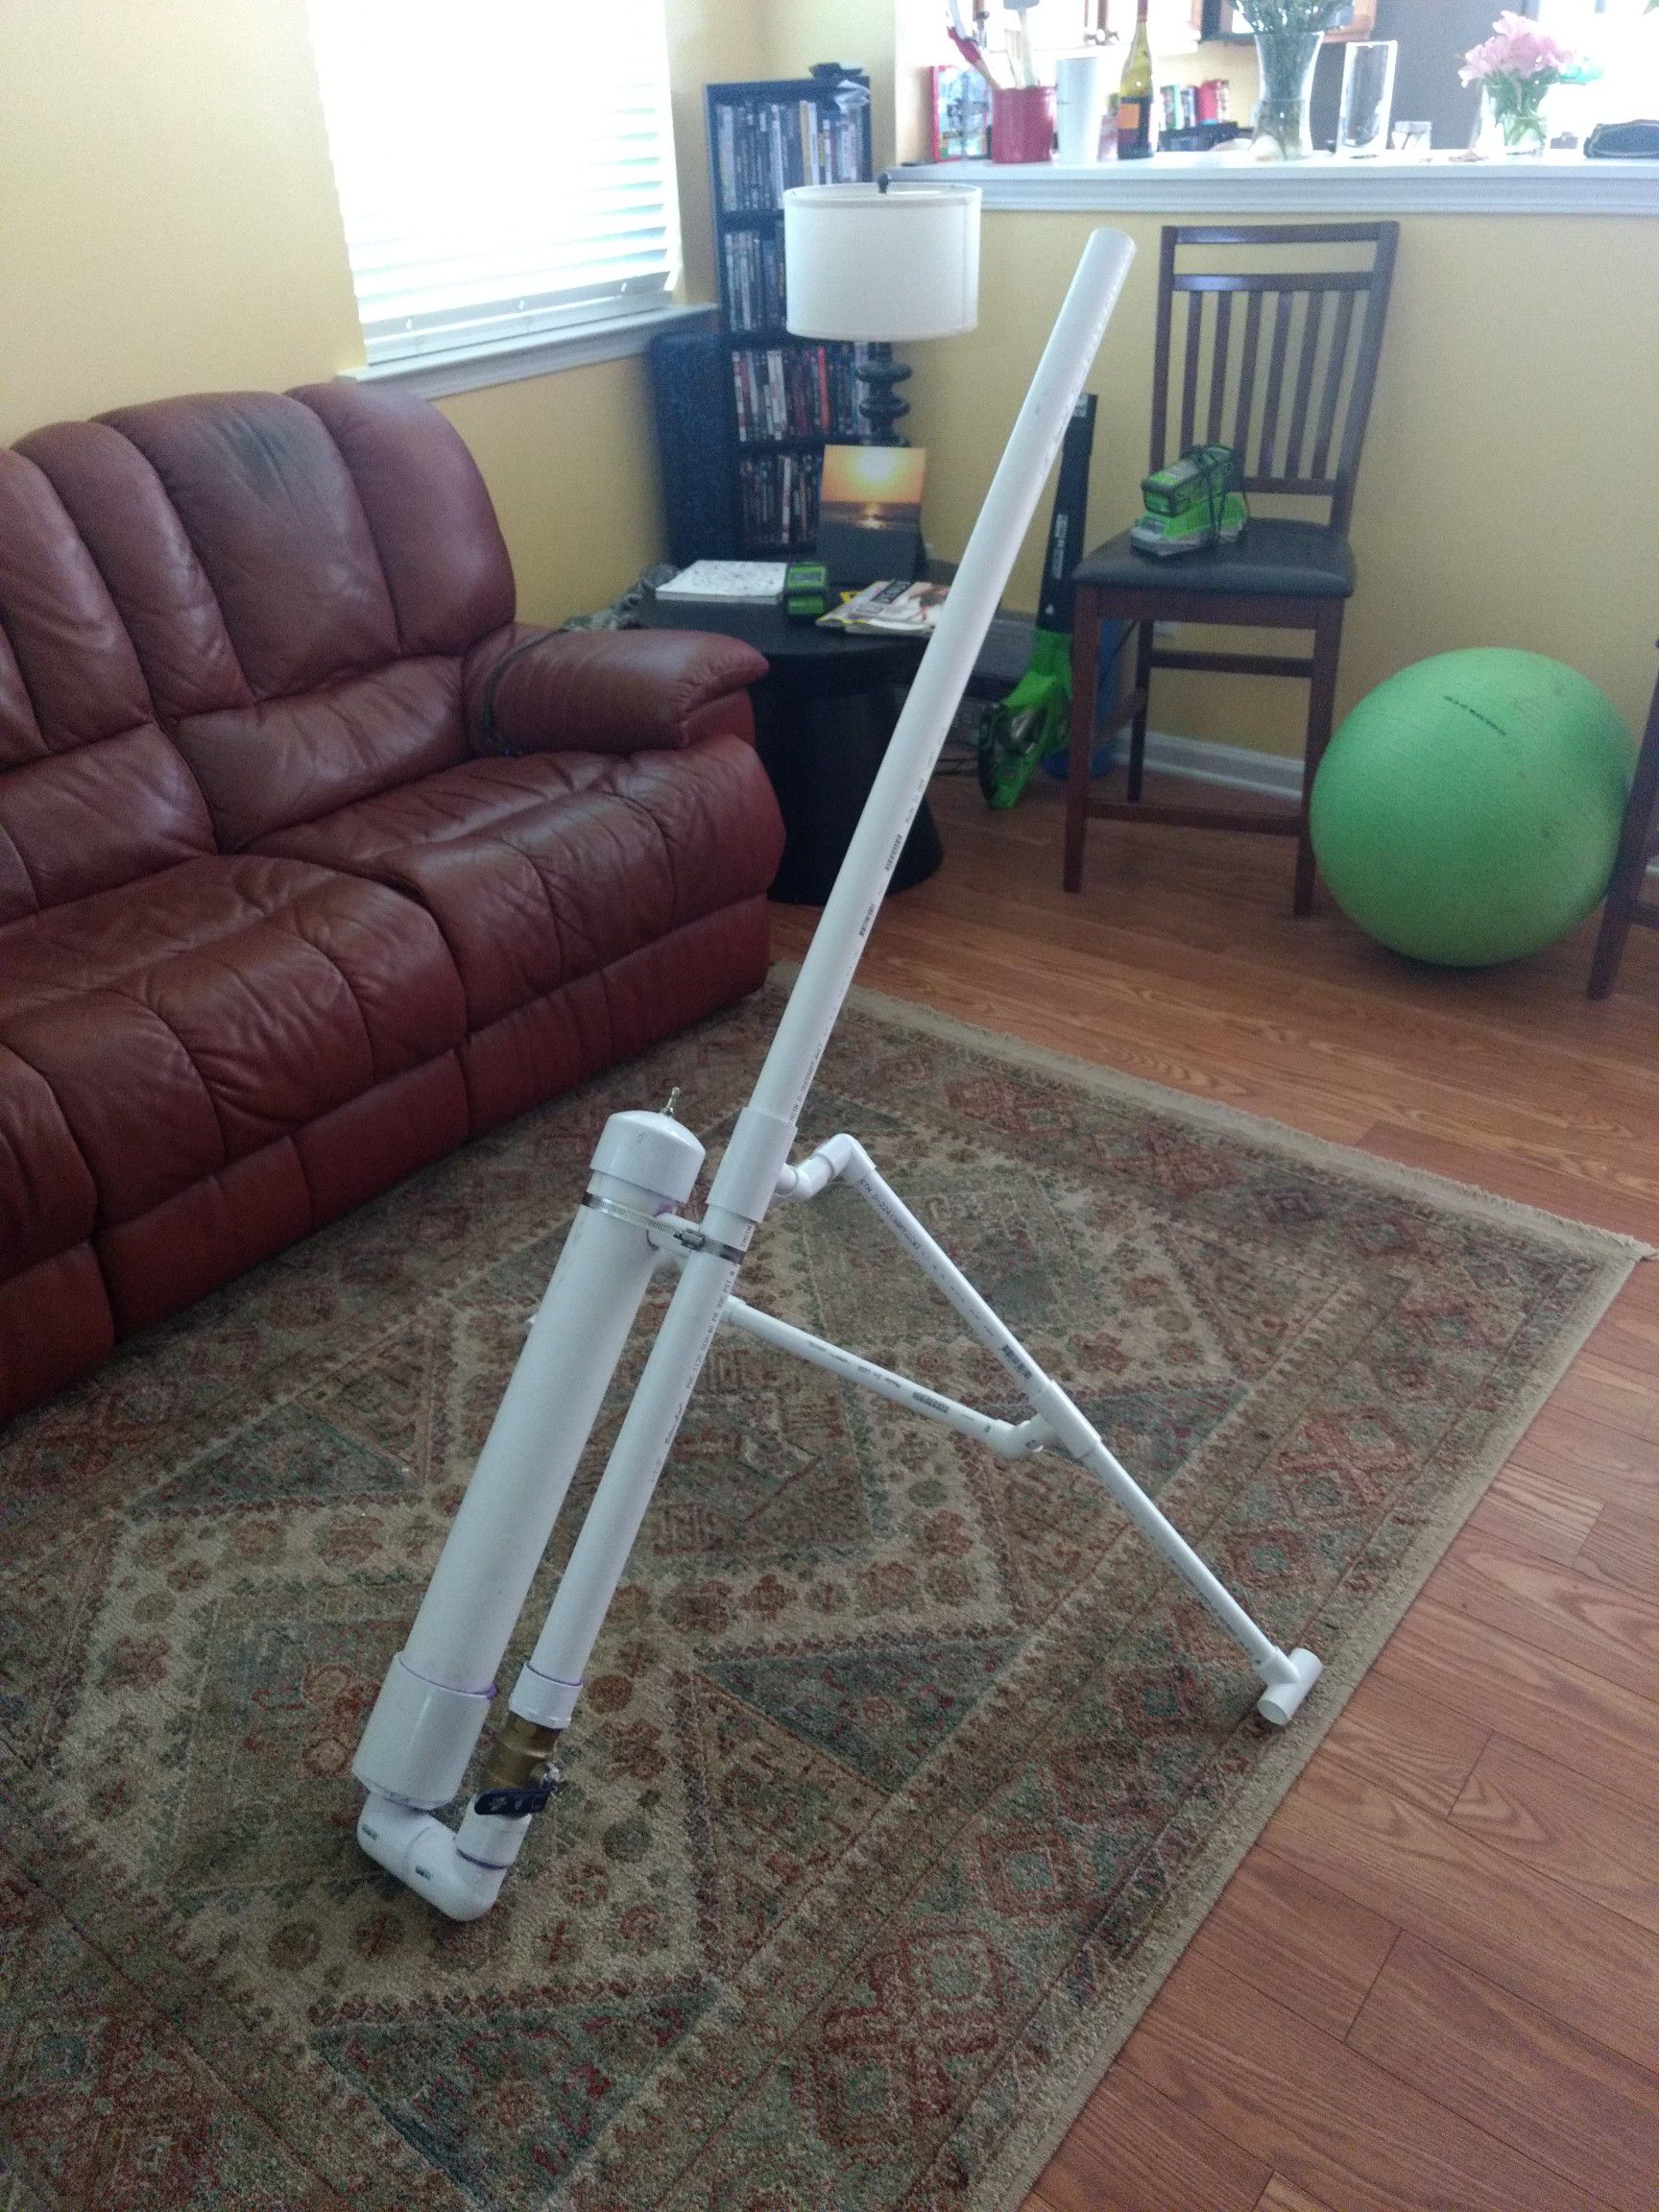 Surf / Beach Bait Cannon for Sale in Cary, NC - OfferUp